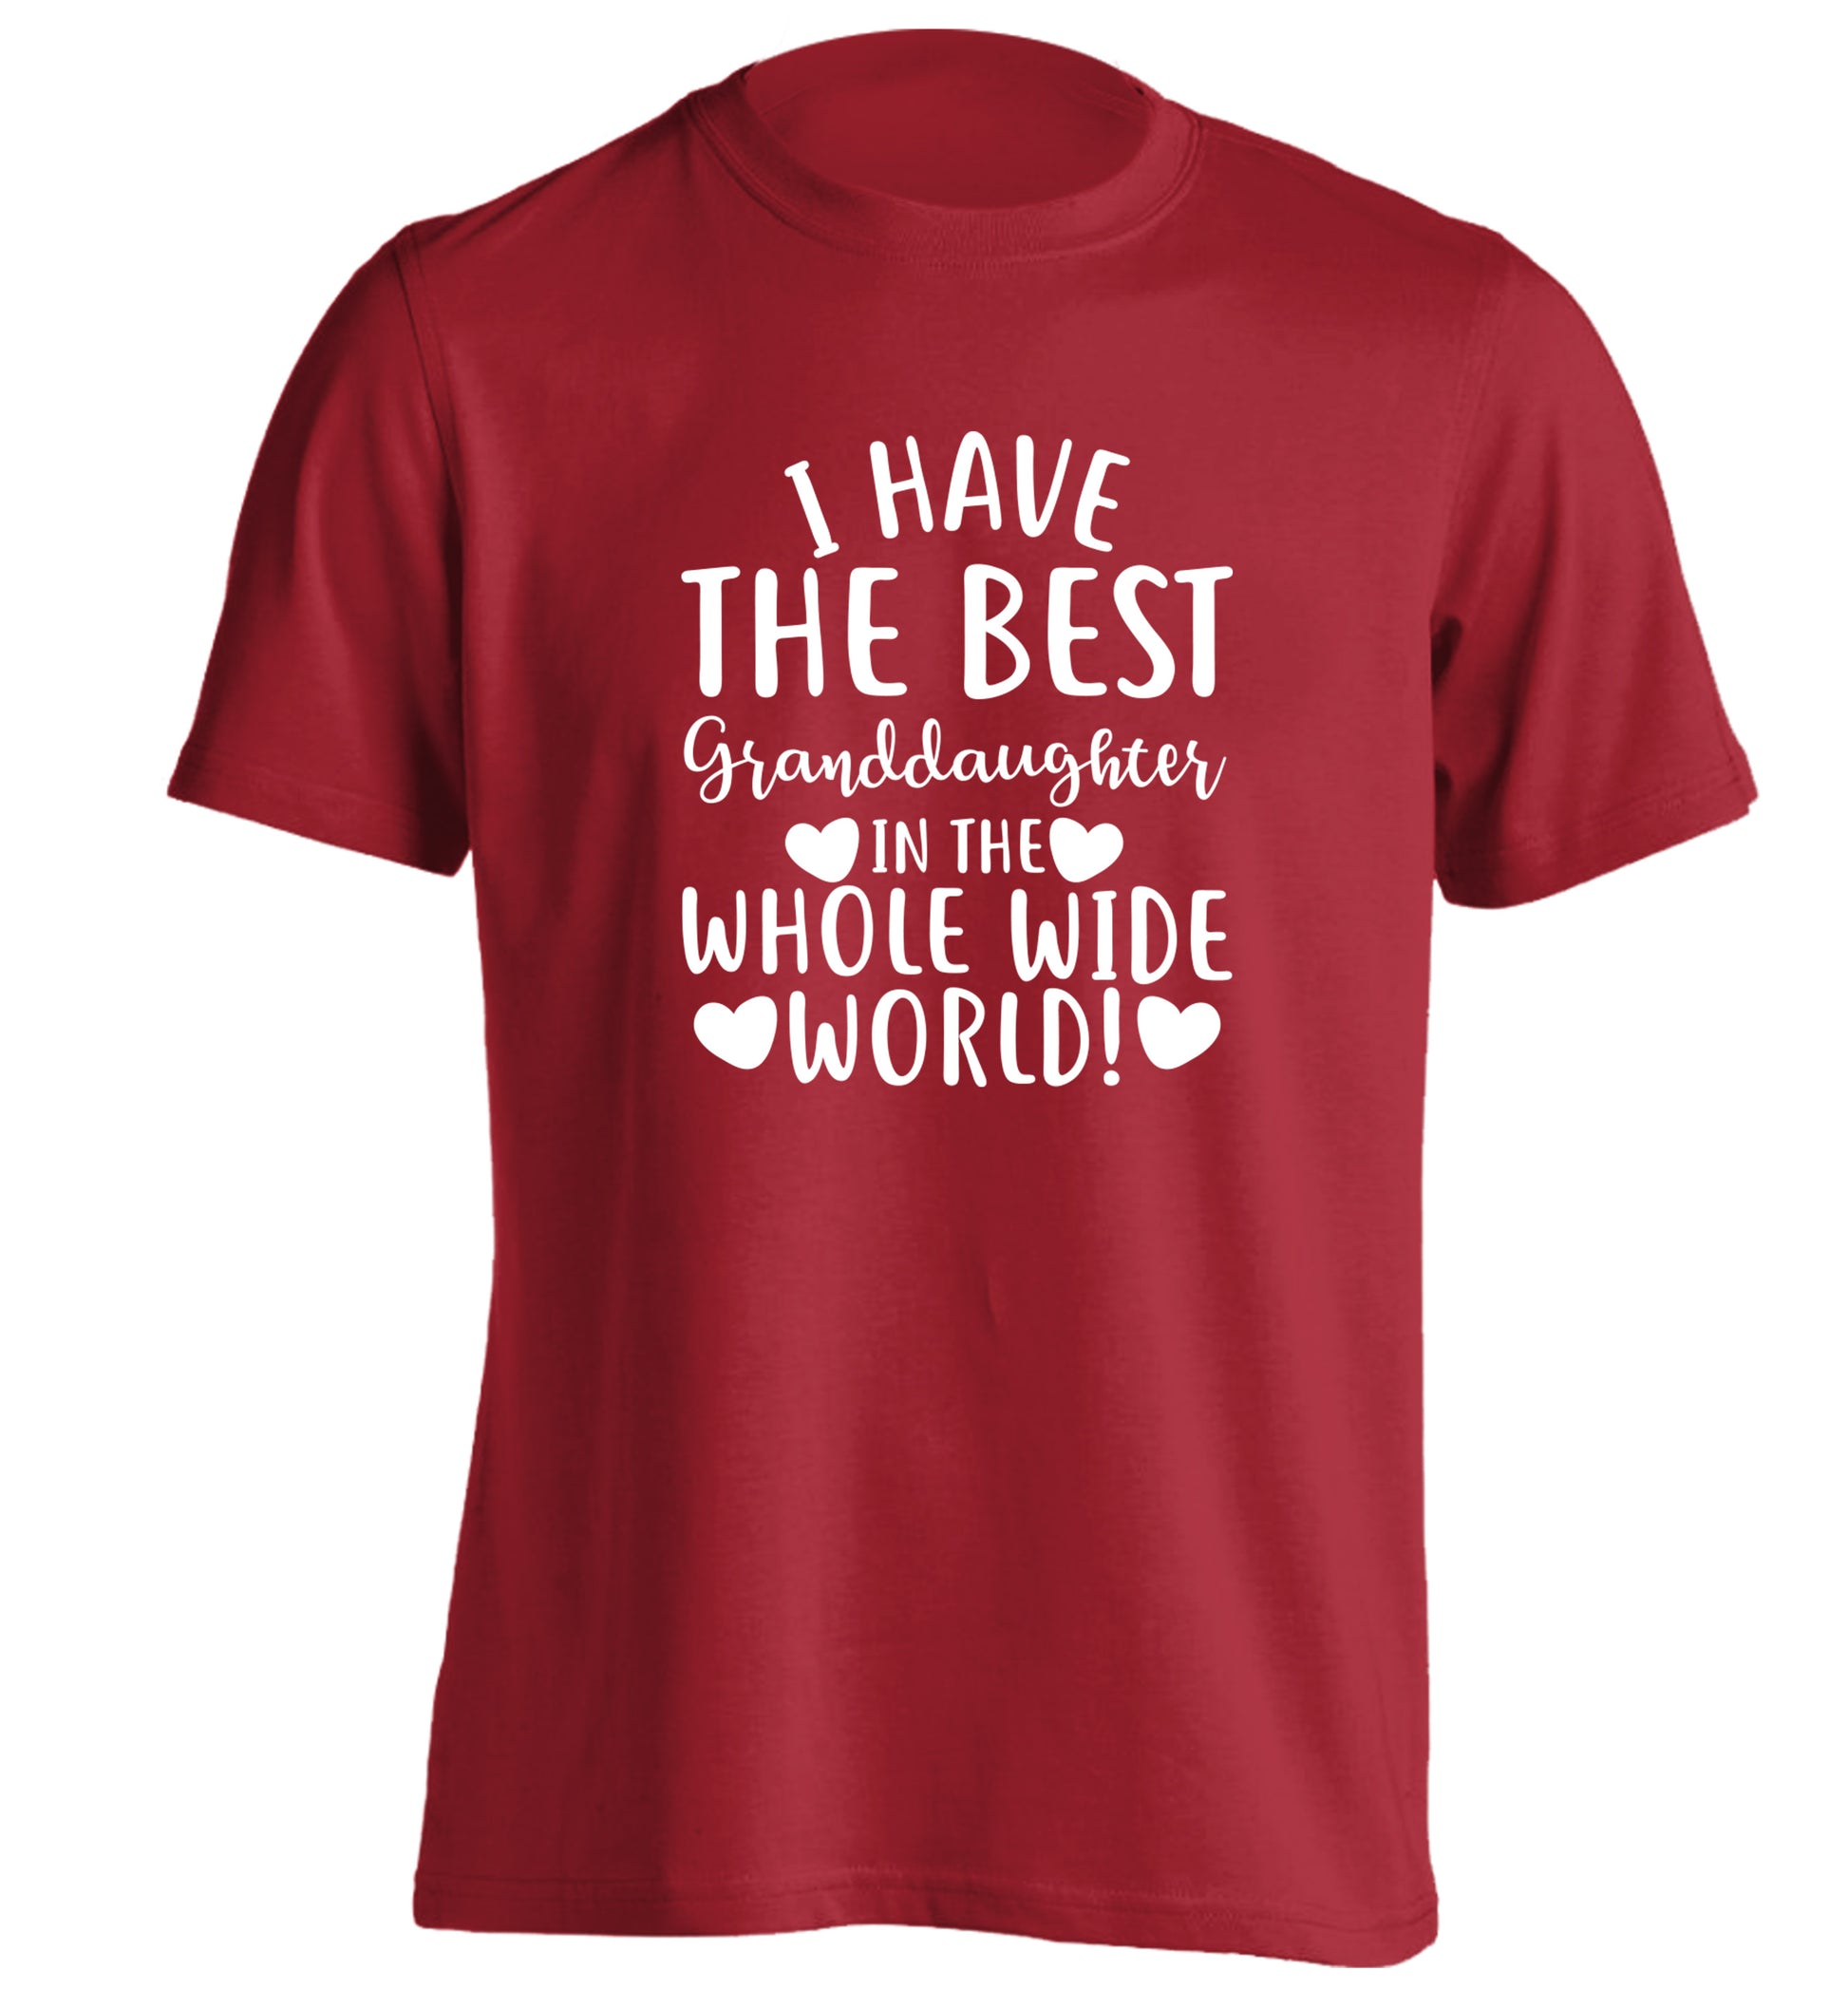 I have the best granddaughter in the whole wide world! adults unisex red Tshirt 2XL